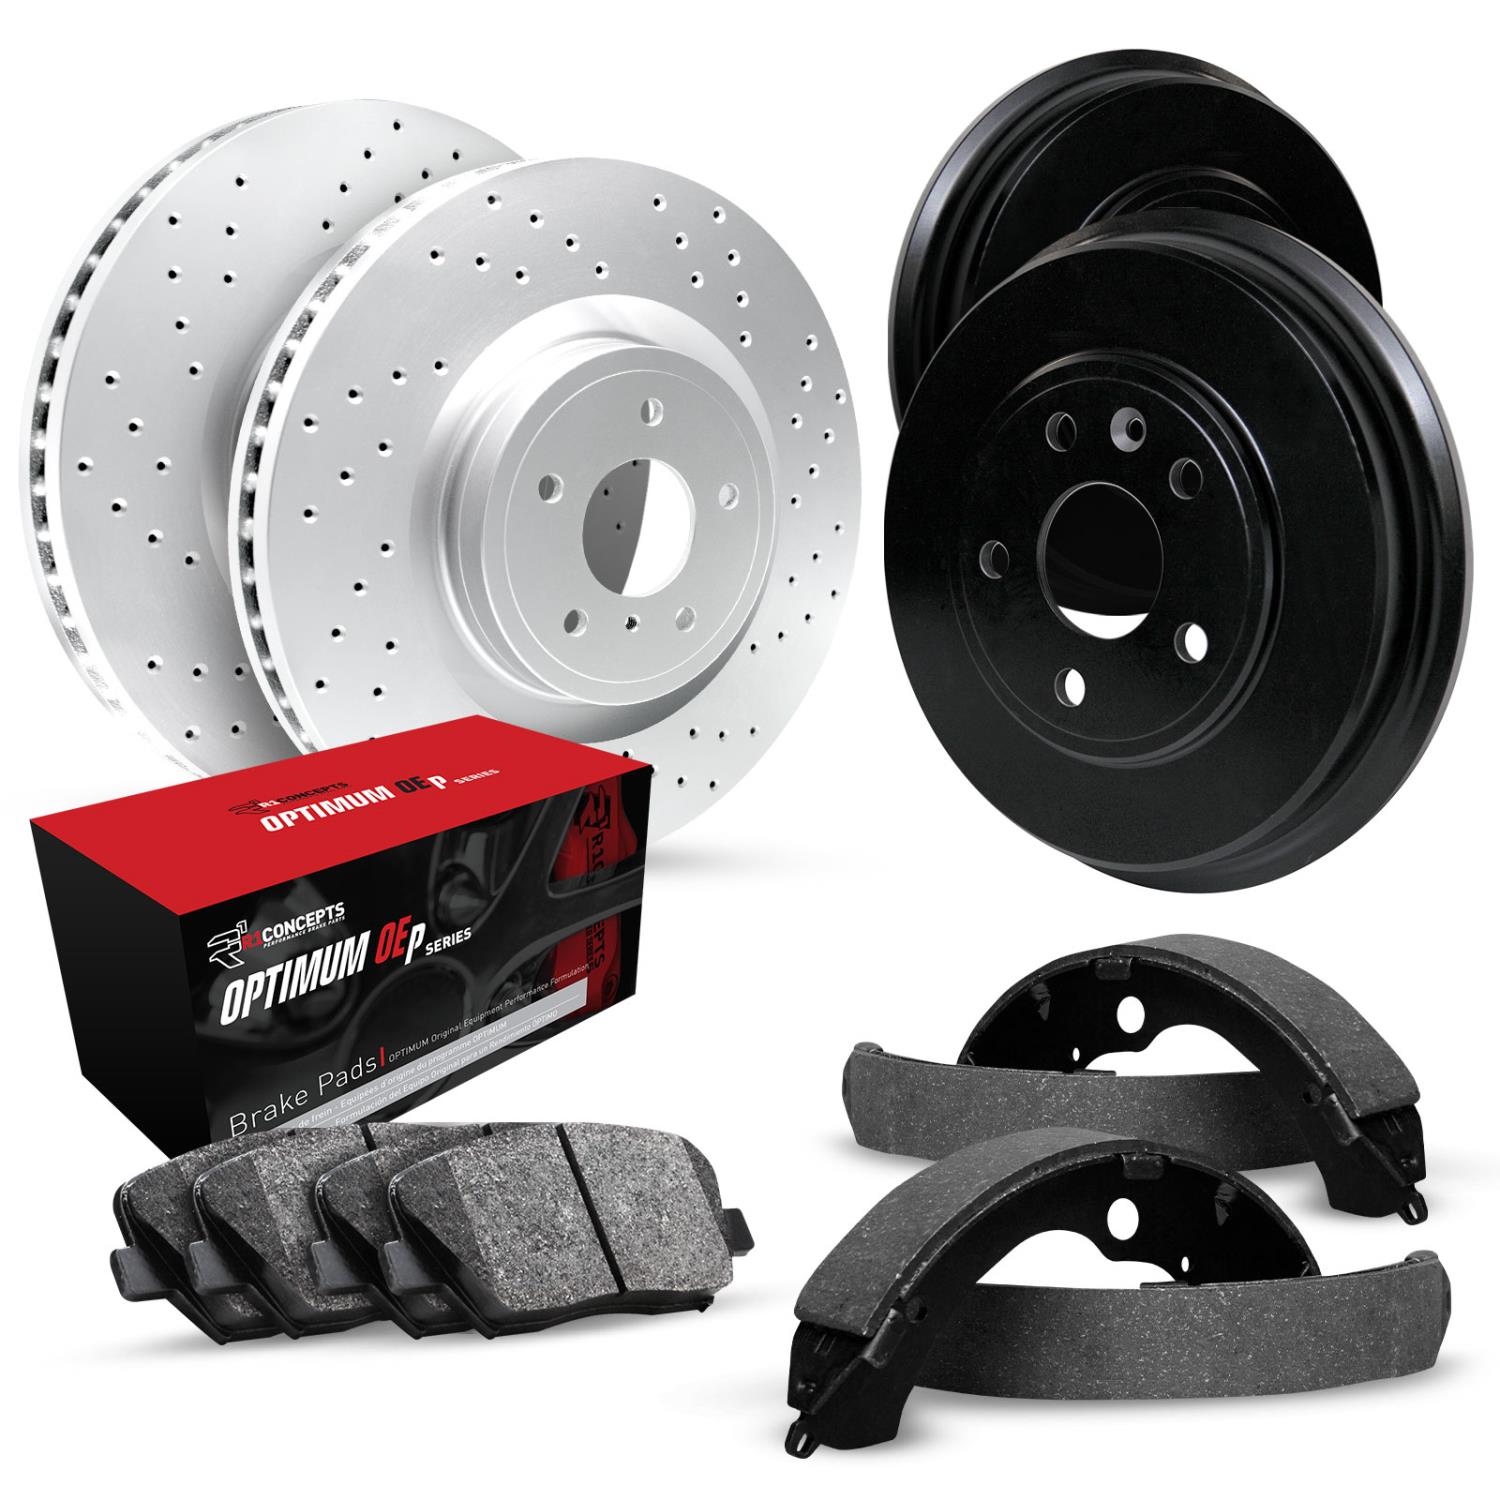 GEO-Carbon Drilled Brake Rotor & Drum Set w/Optimum OE Pads & Shoes, 1991-2002 GM, Position: Front & Rear